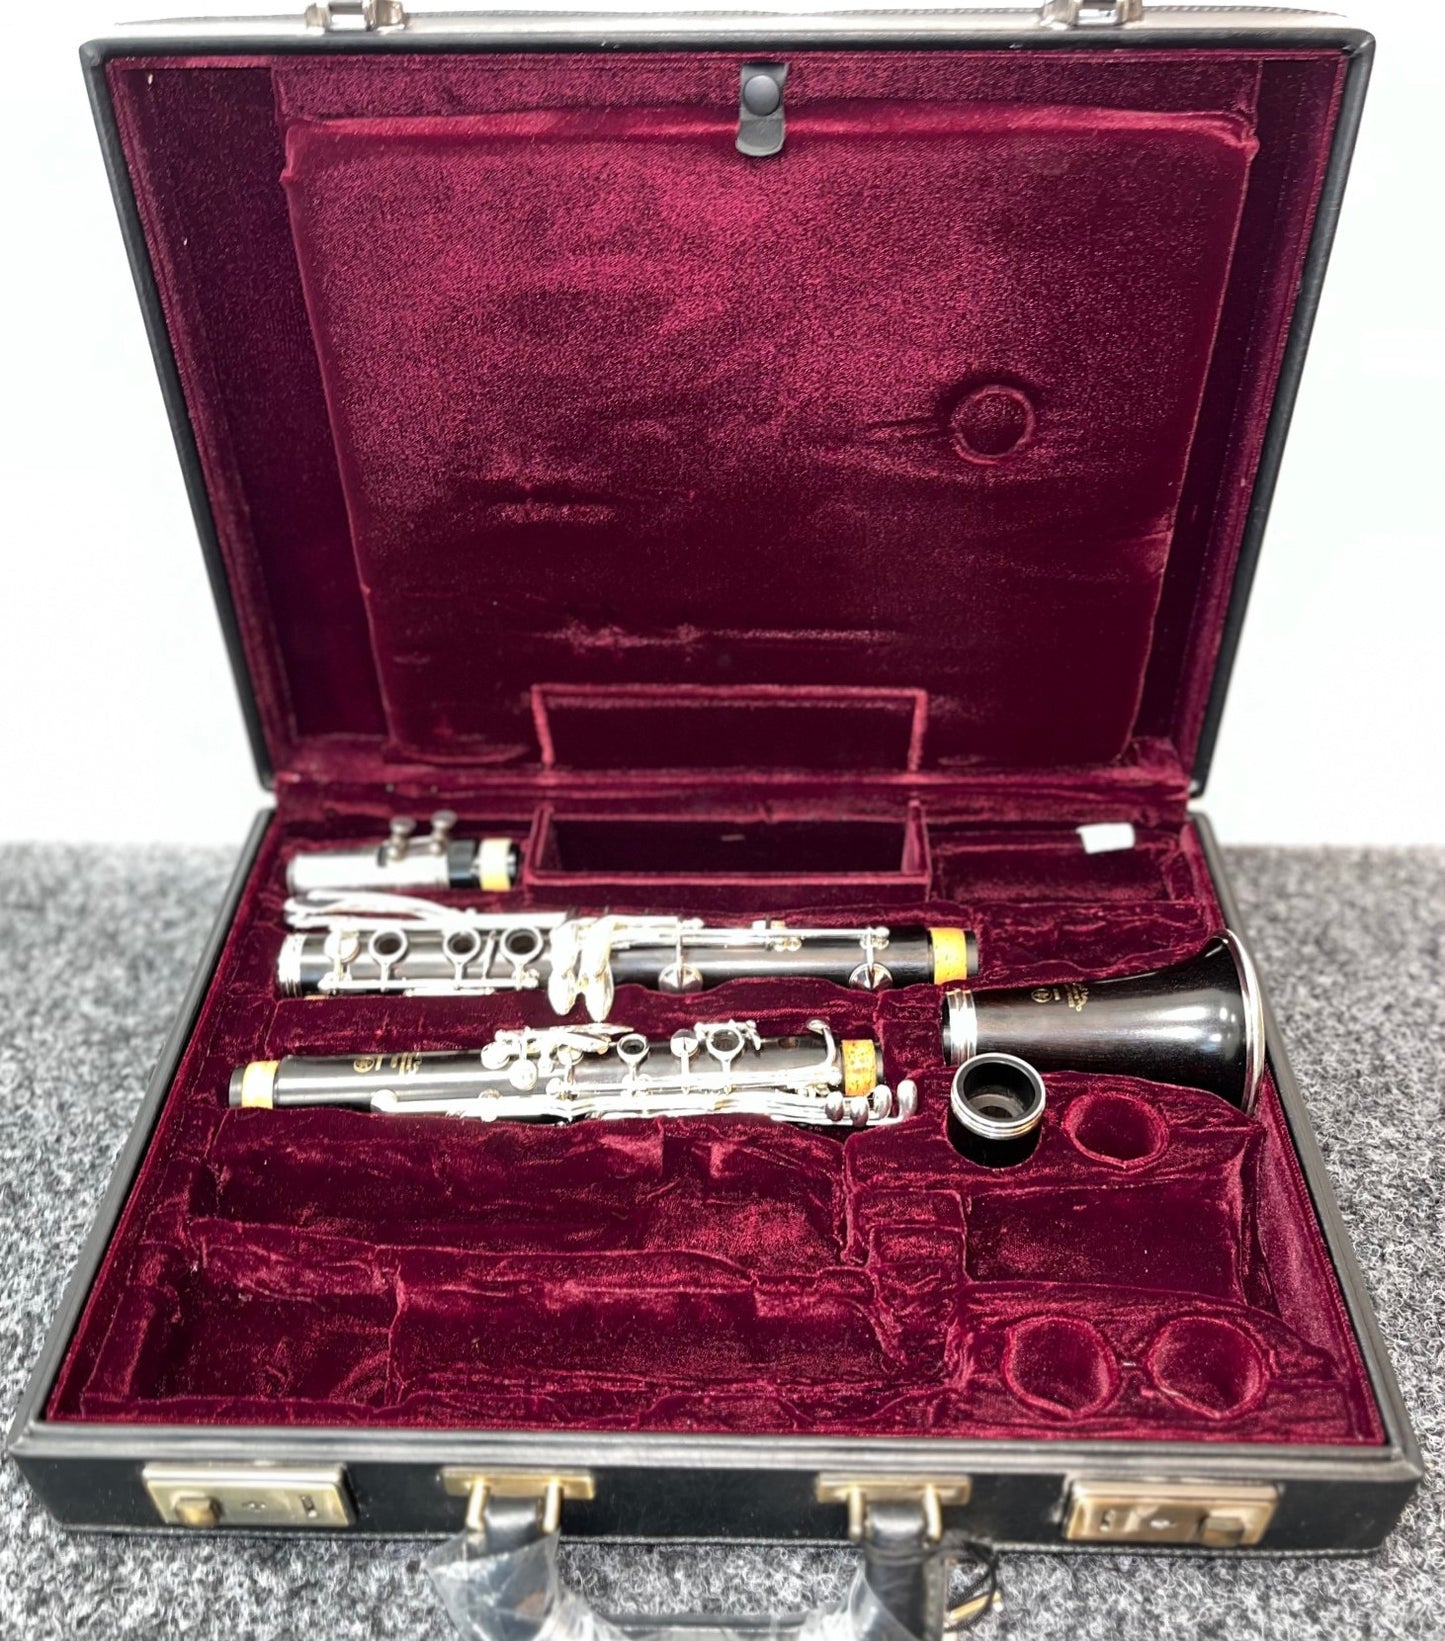 Yamaha YCL650 A Clarinet (pre-owned)